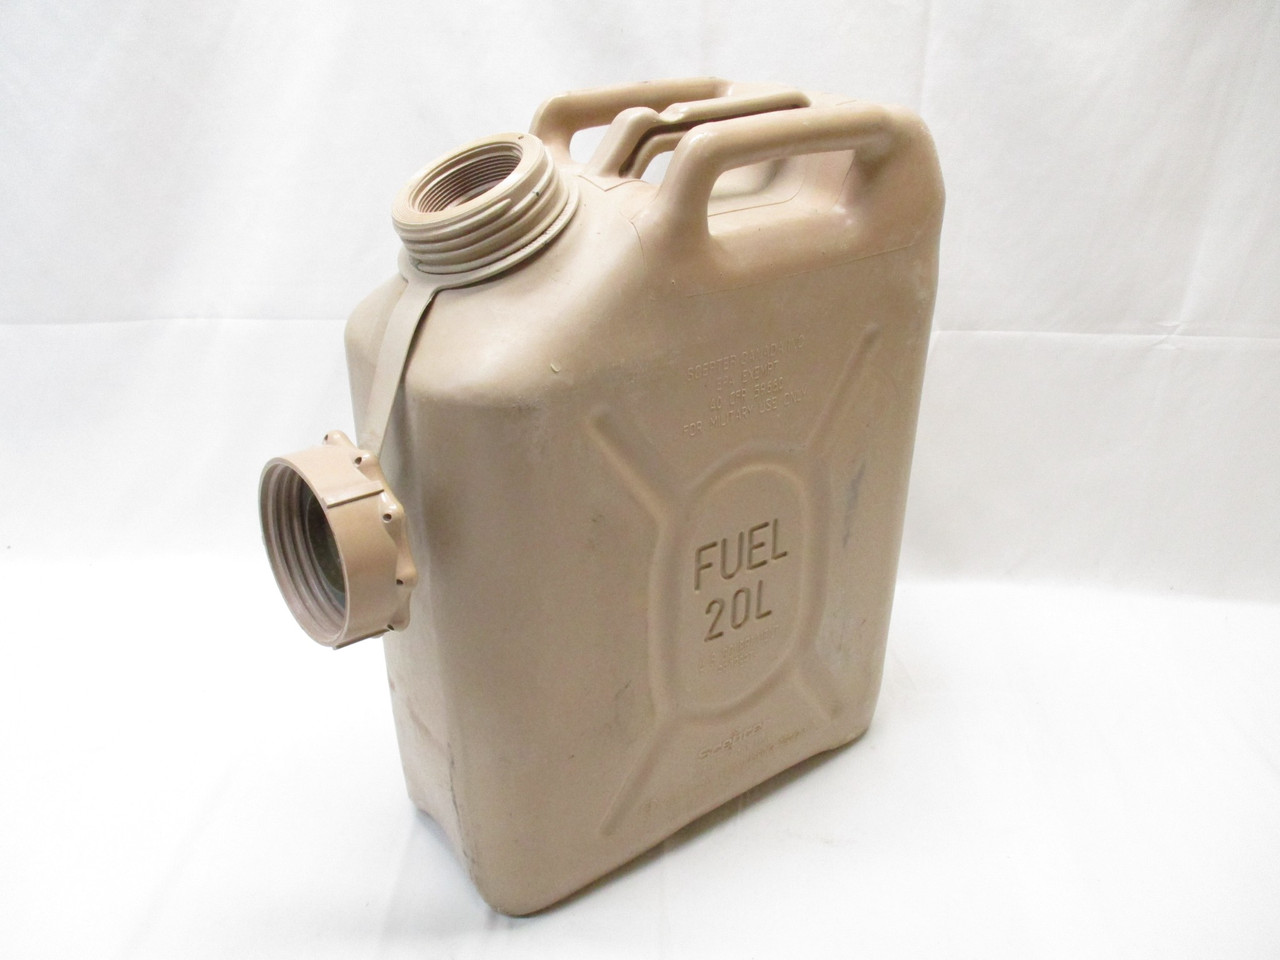 DESERT TAN MILITARY JERRY CAN SCEPTER 5 GALLON GAS CONTAINER 20L (USED) (EMPTY)